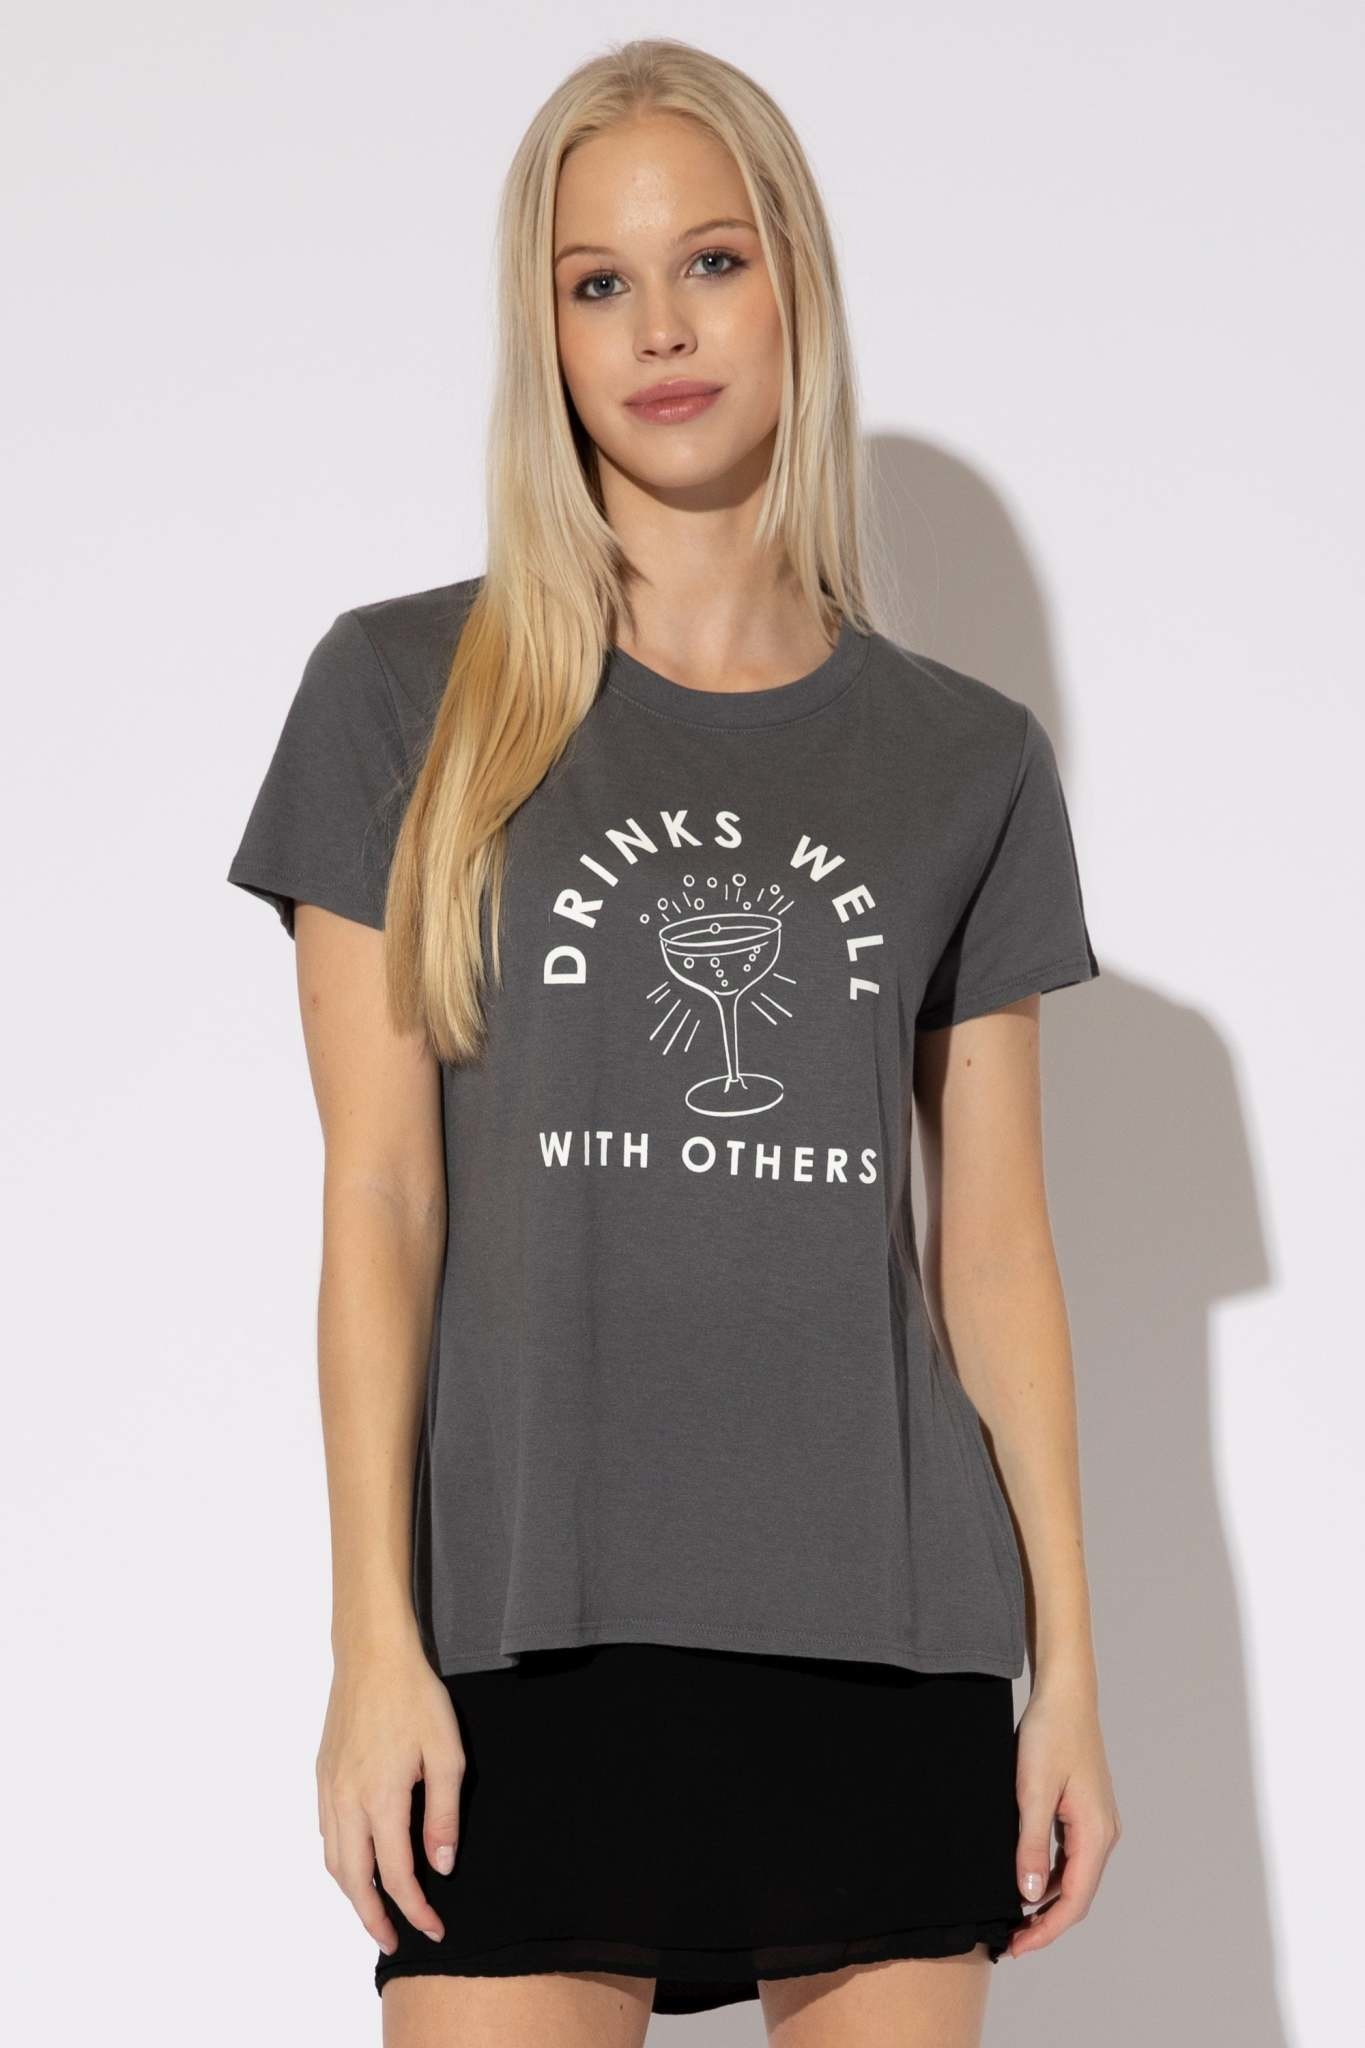 Sub Urban Riot Drinks Well With Others Tee